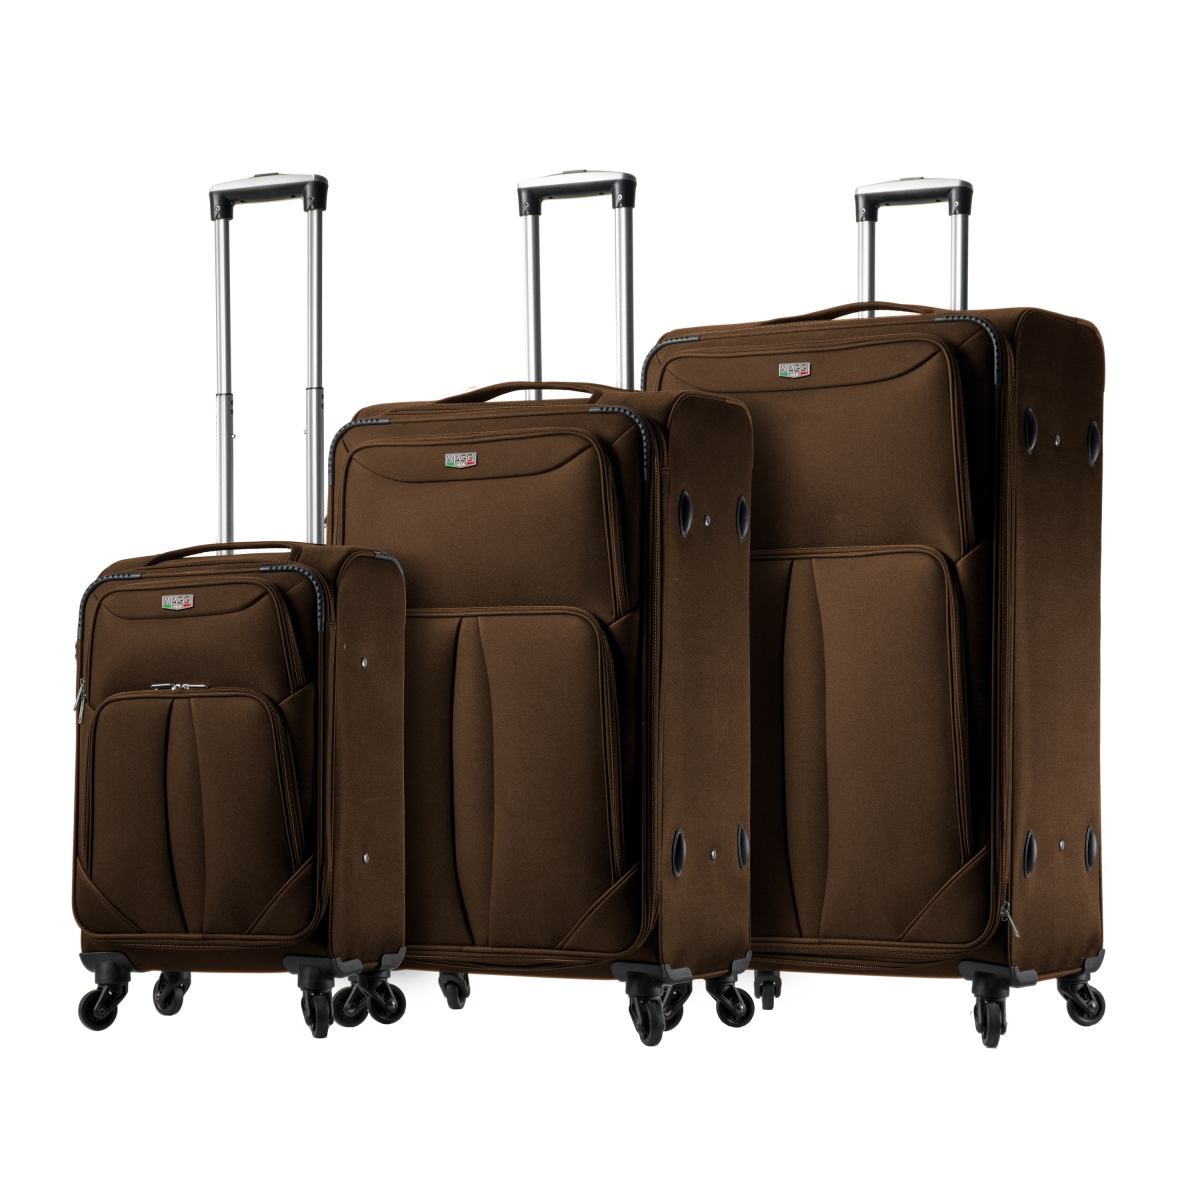 V1100-03pc-brw Sione Softside Spinner Carry-on Set, Brown - 3 Piece